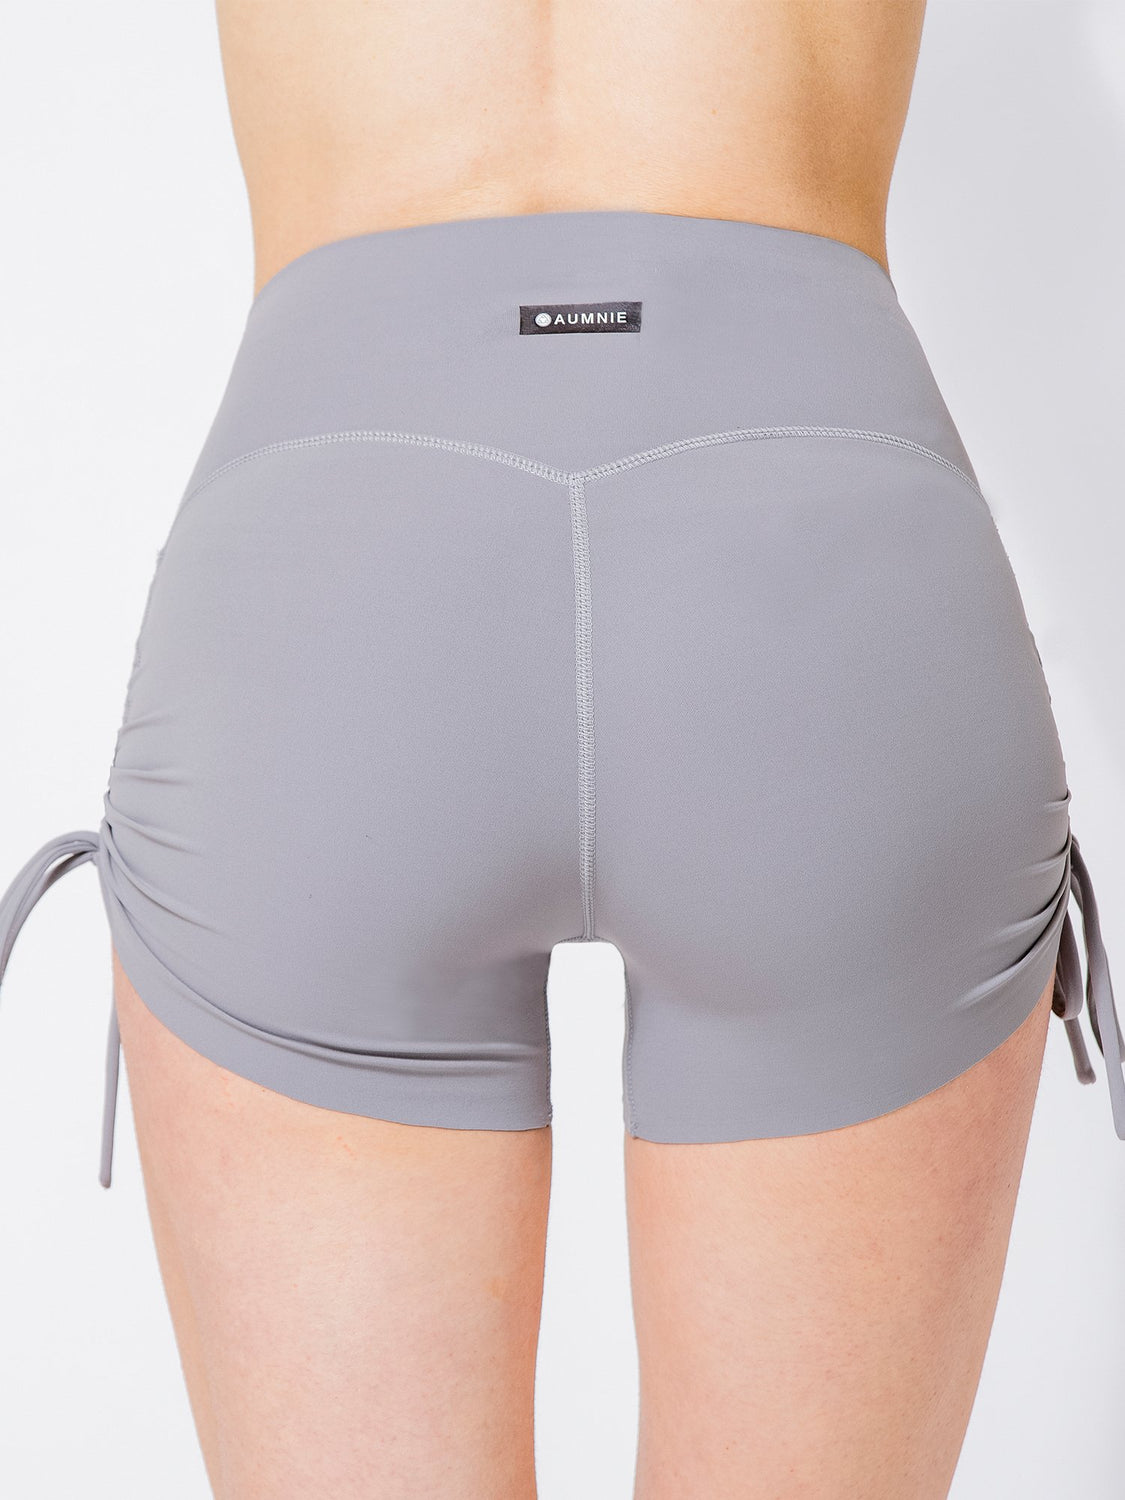 Nude Plastic Waist Cushion Workout Shorts Women For Women Ideal For  Fitness, Yoga, Running, And Gym Workouts From Nnmw, $25.82